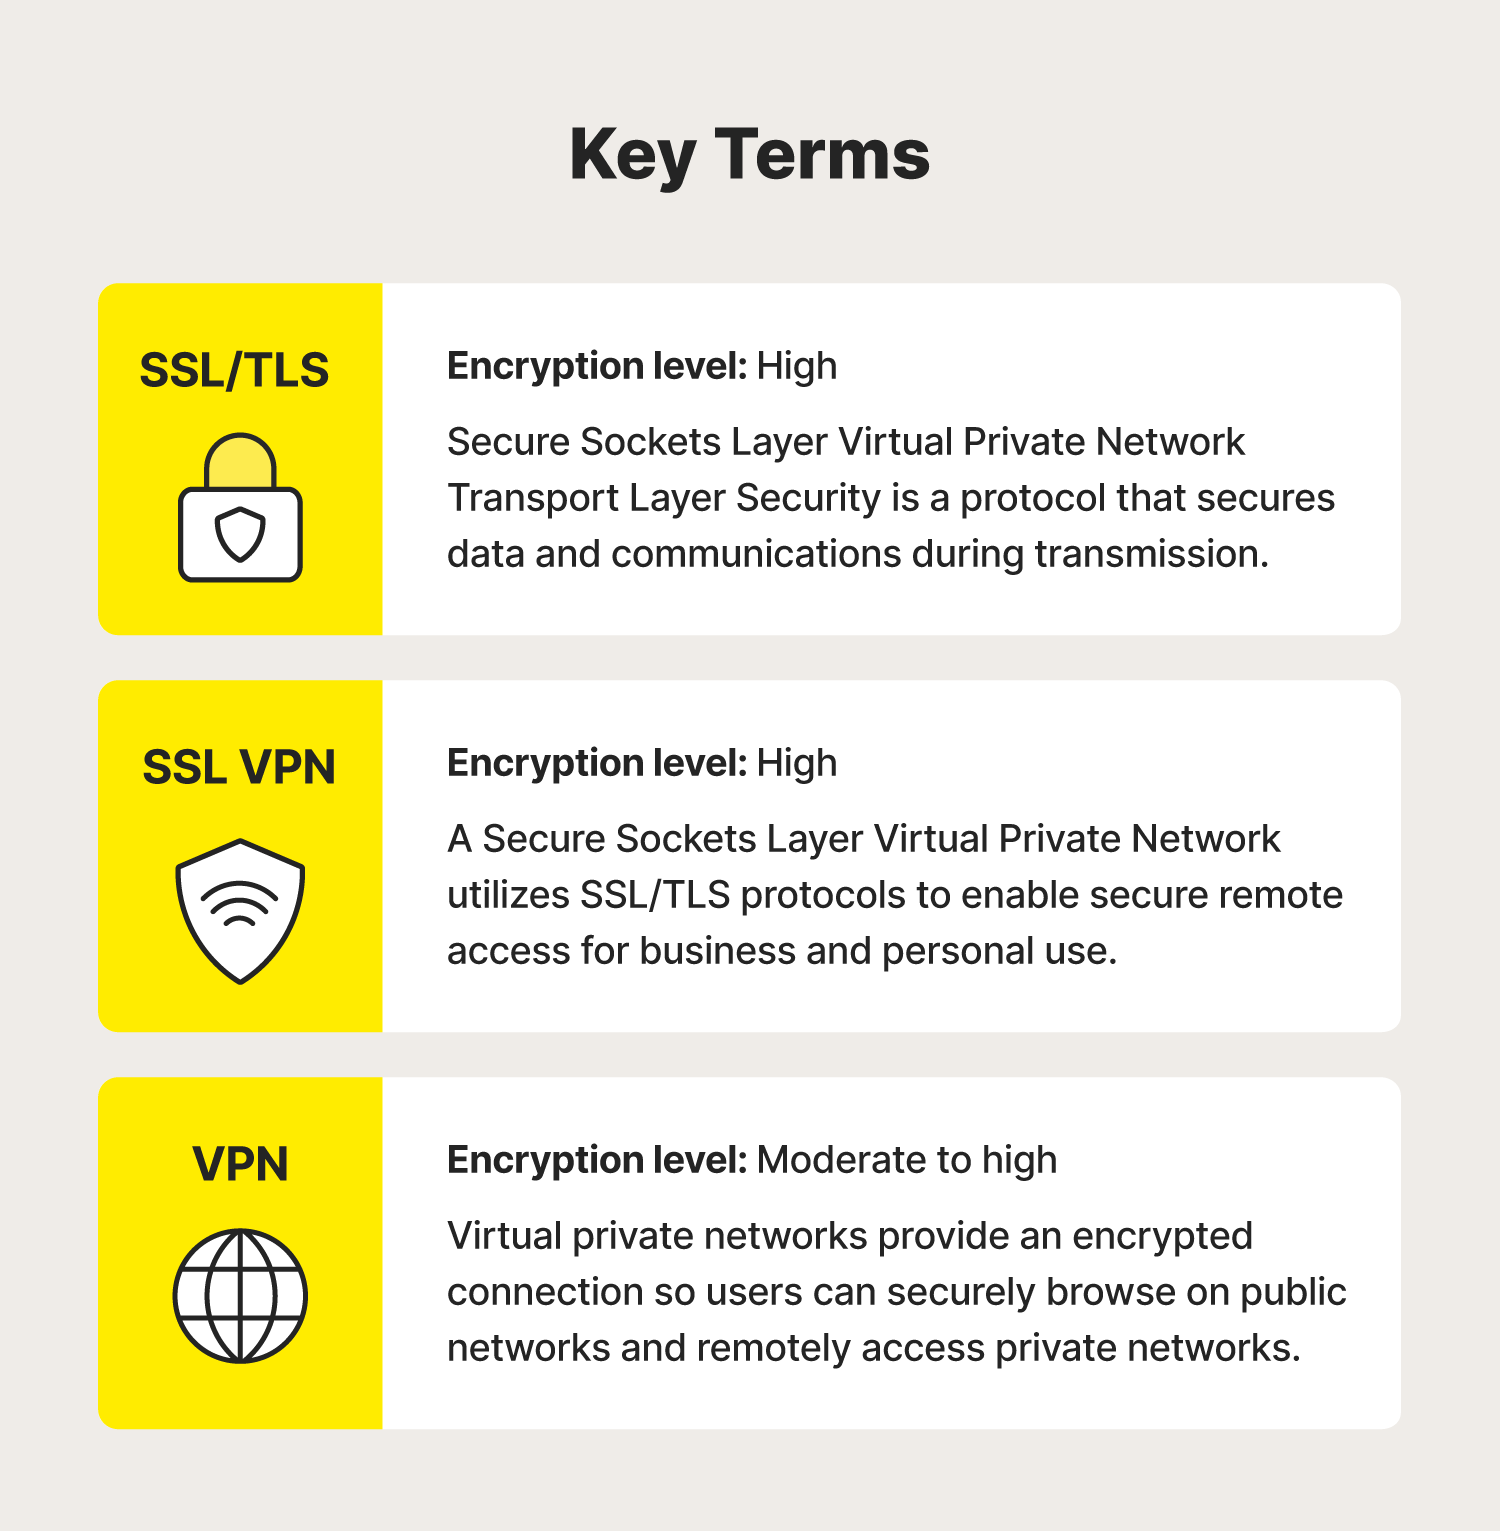 The definitions and differences between SSL/TLS, SSL VPN, and VPN.